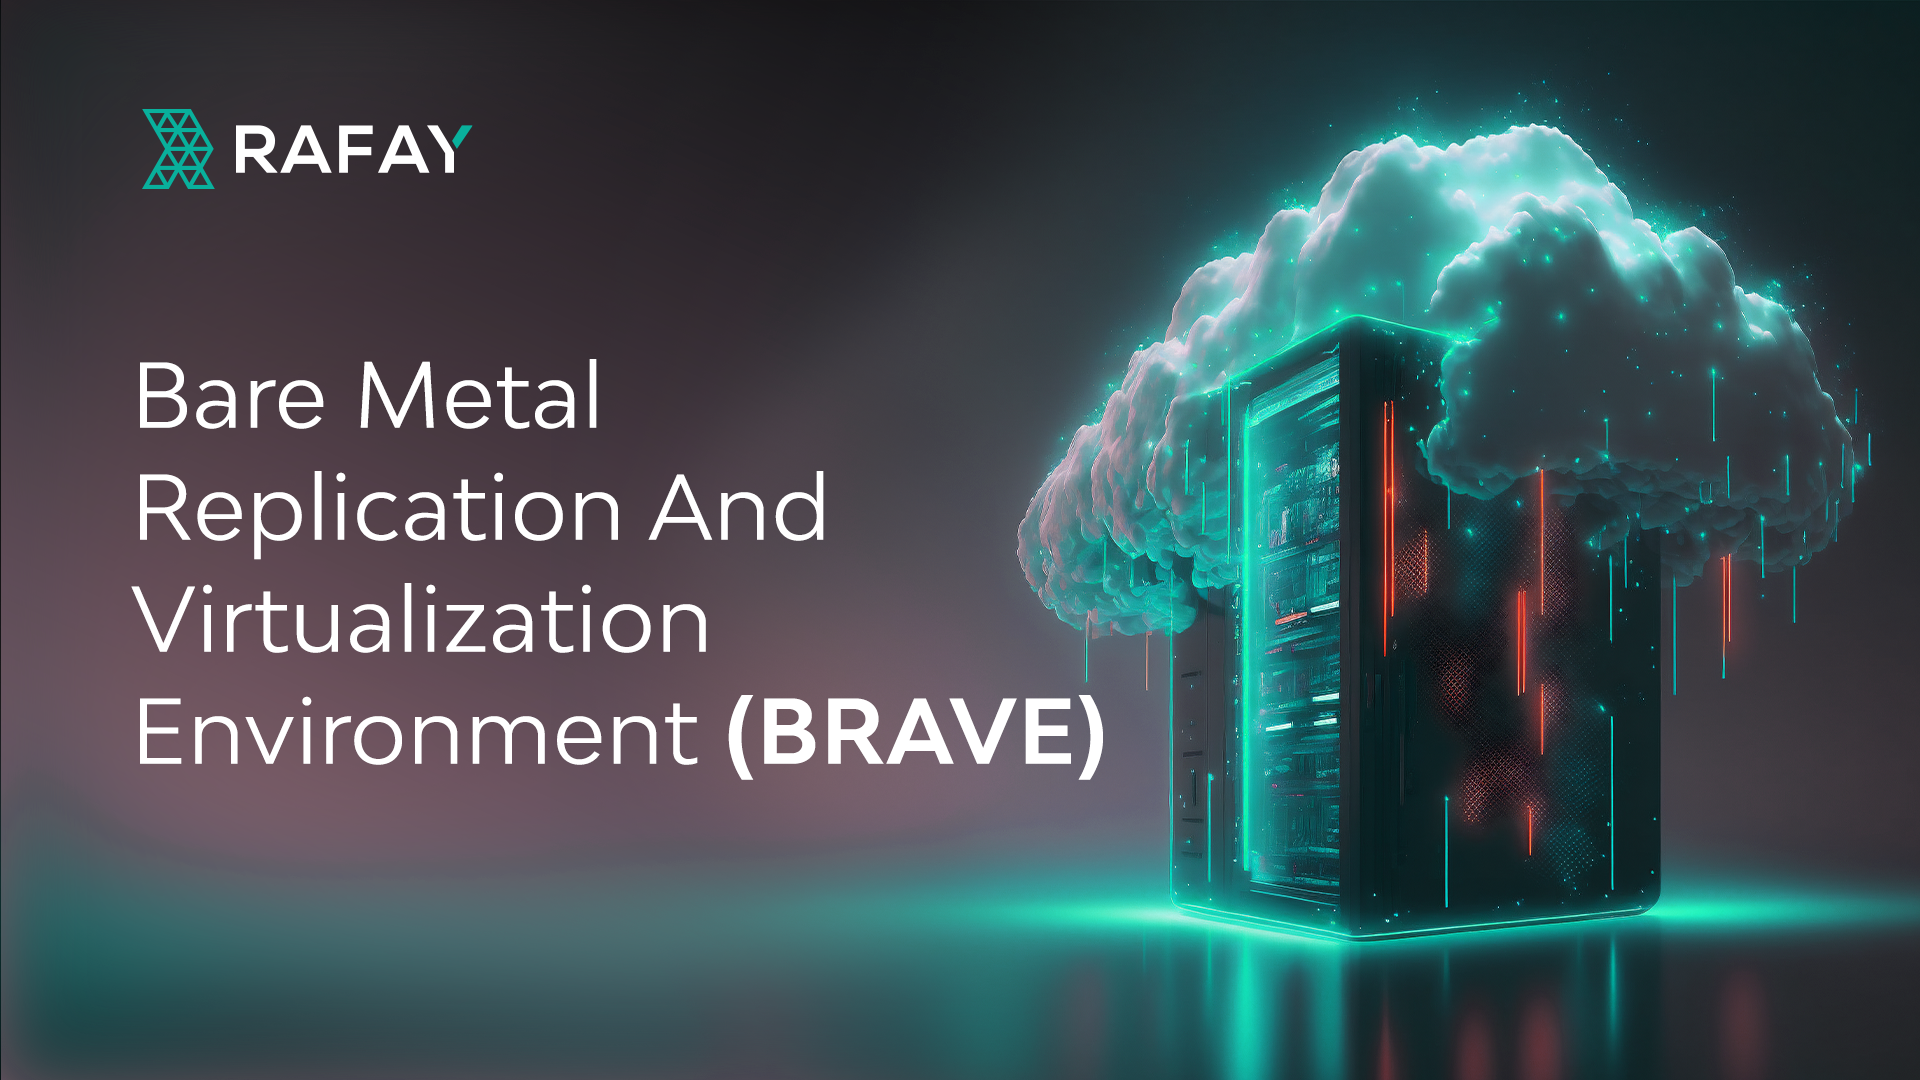 Image for Bare Metal Replication And Virtualization Environment (BRAVE)